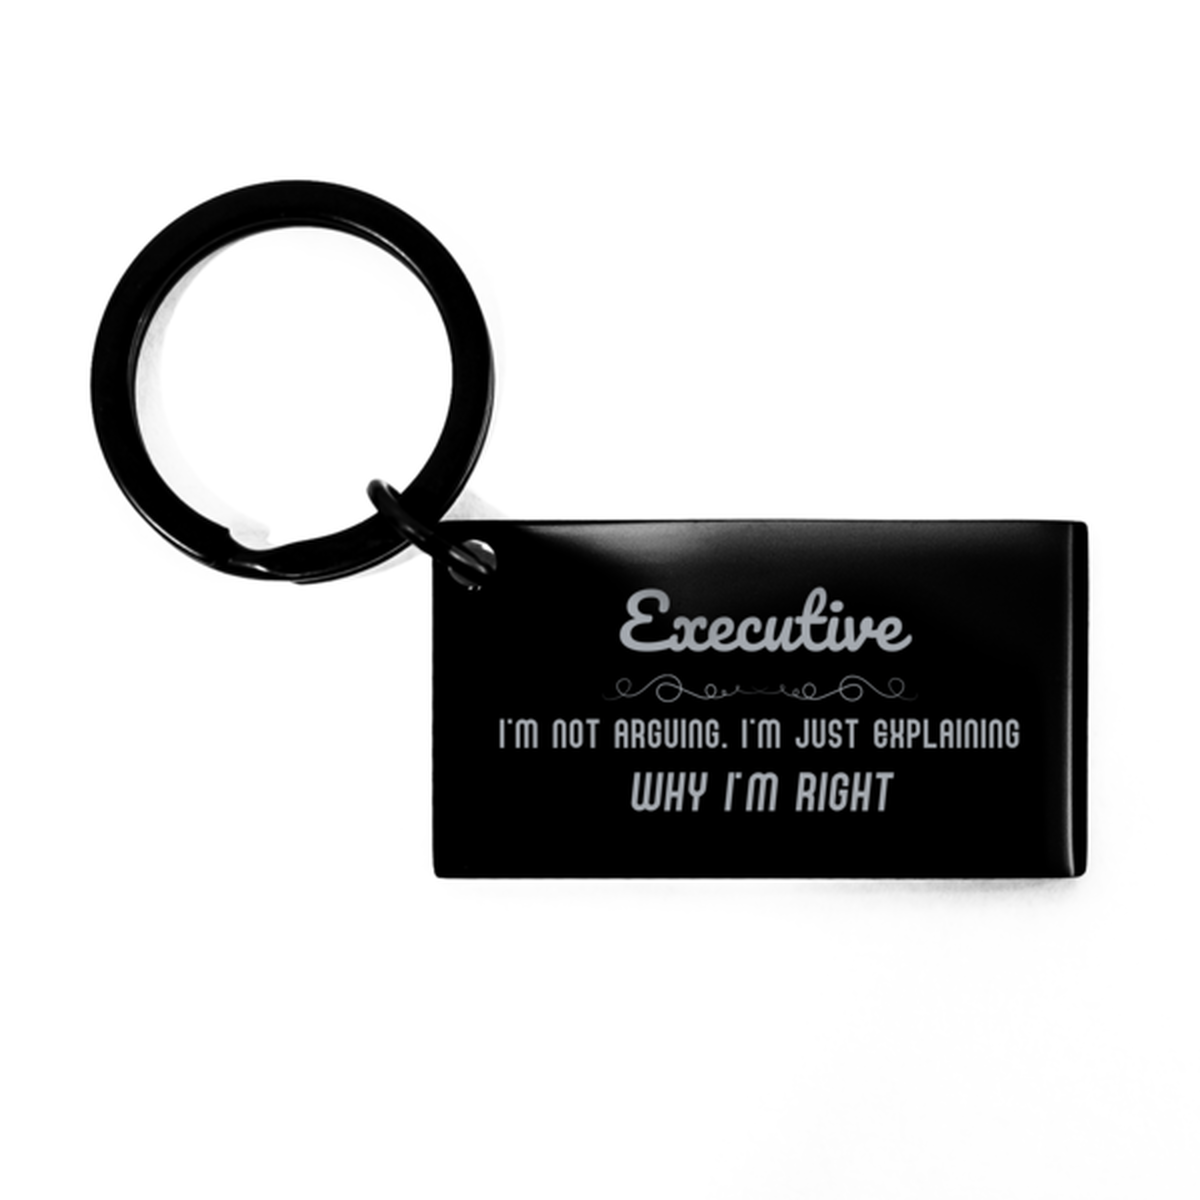 Executive I'm not Arguing. I'm Just Explaining Why I'm RIGHT Keychain, Funny Saying Quote Executive Gifts For Executive Graduation Birthday Christmas Gifts for Men Women Coworker